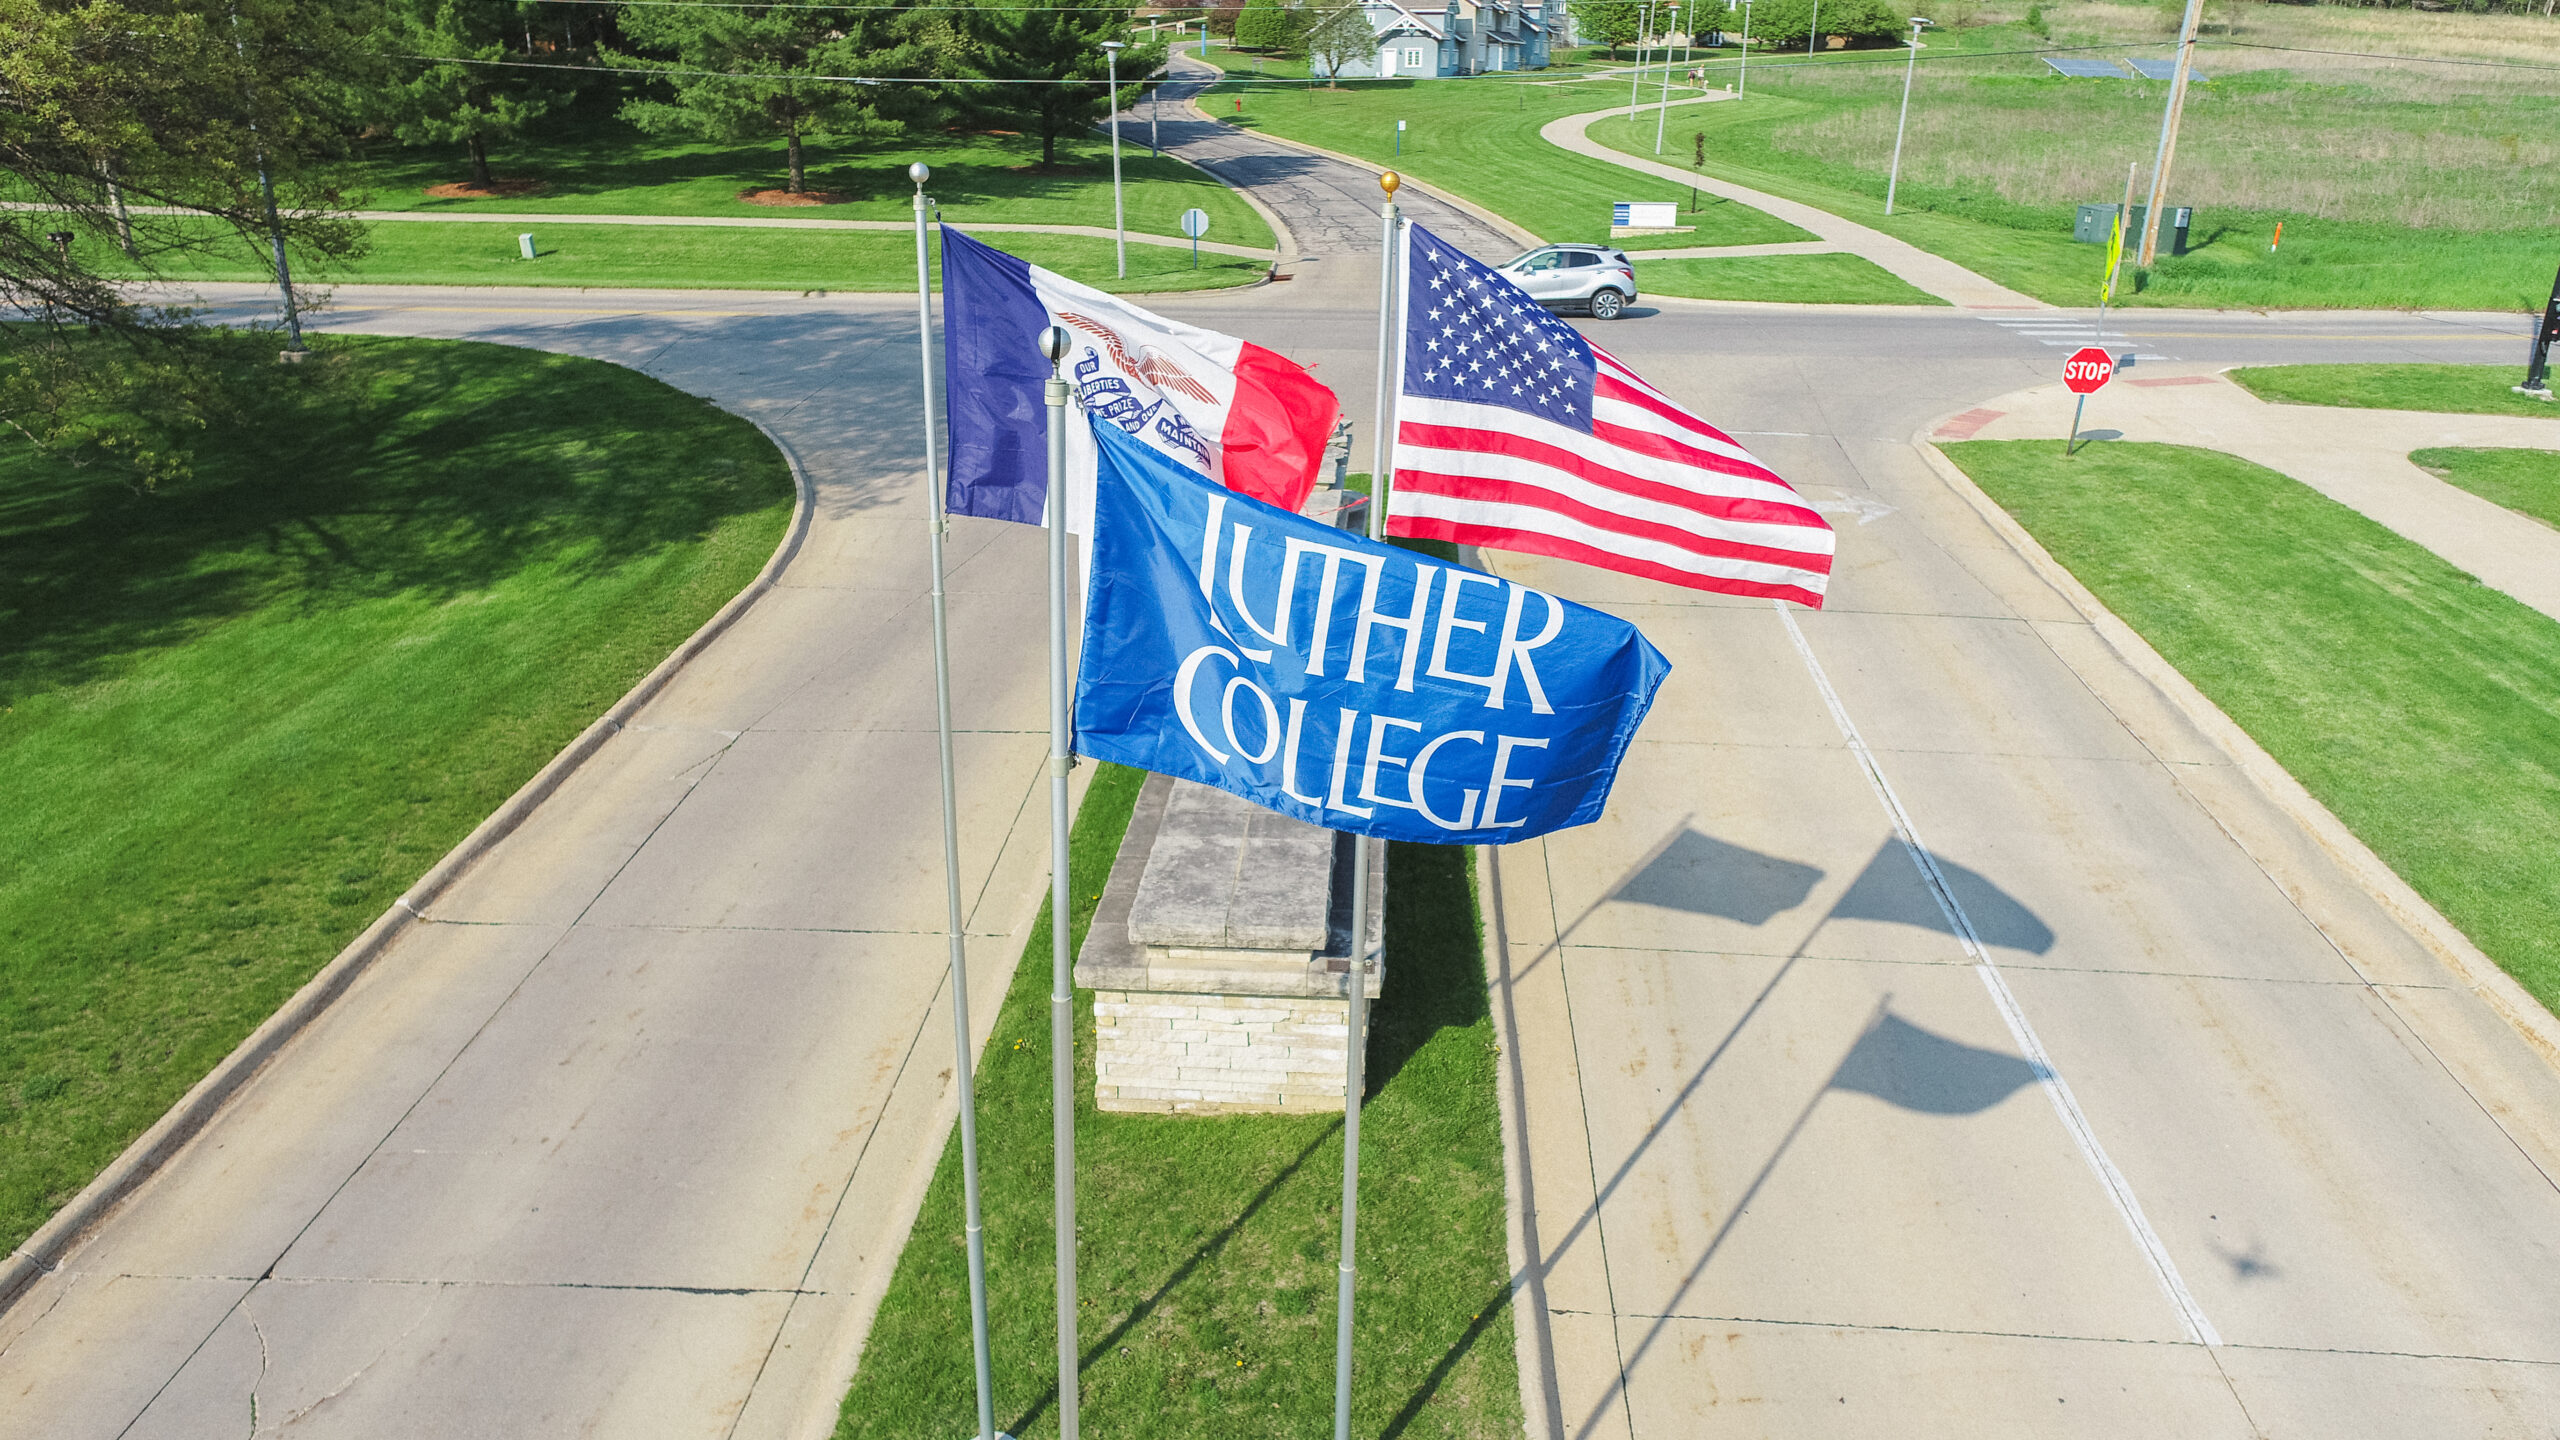 Luther College flag in front of Iowa and American flags.